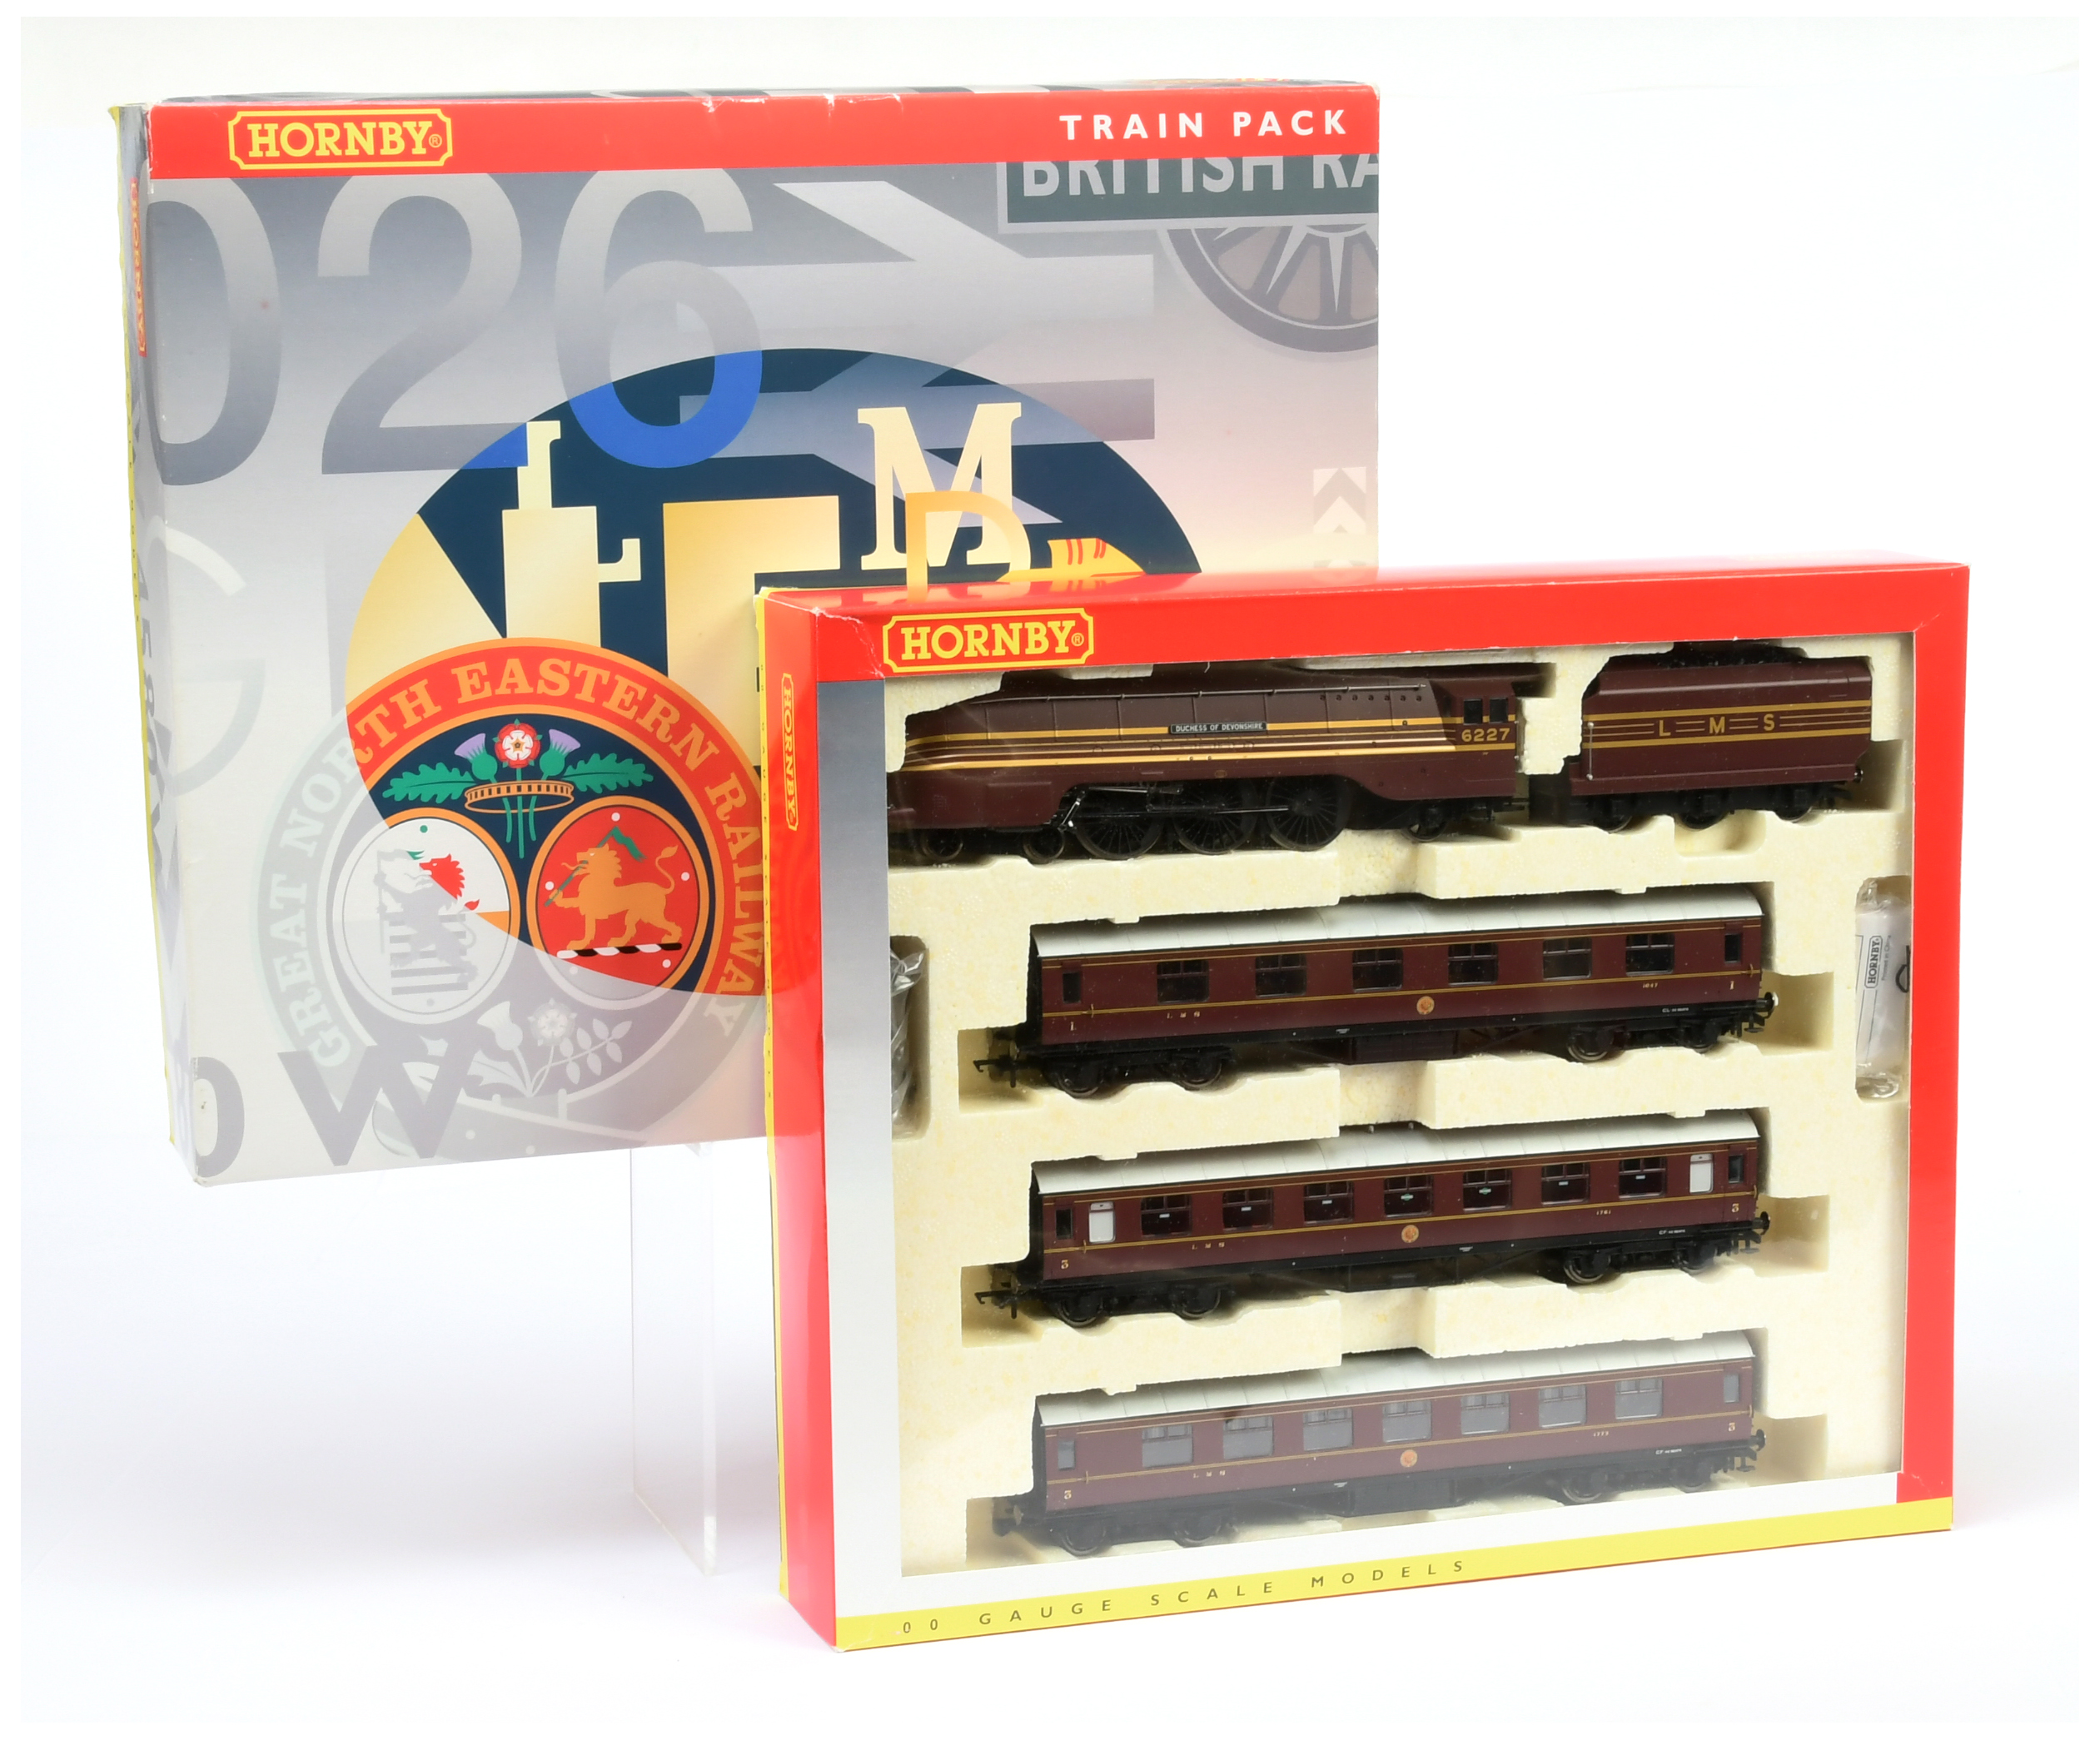 Hornby (China) R2659M (Limited Edition) "The Royal Highlander" Train Pack 